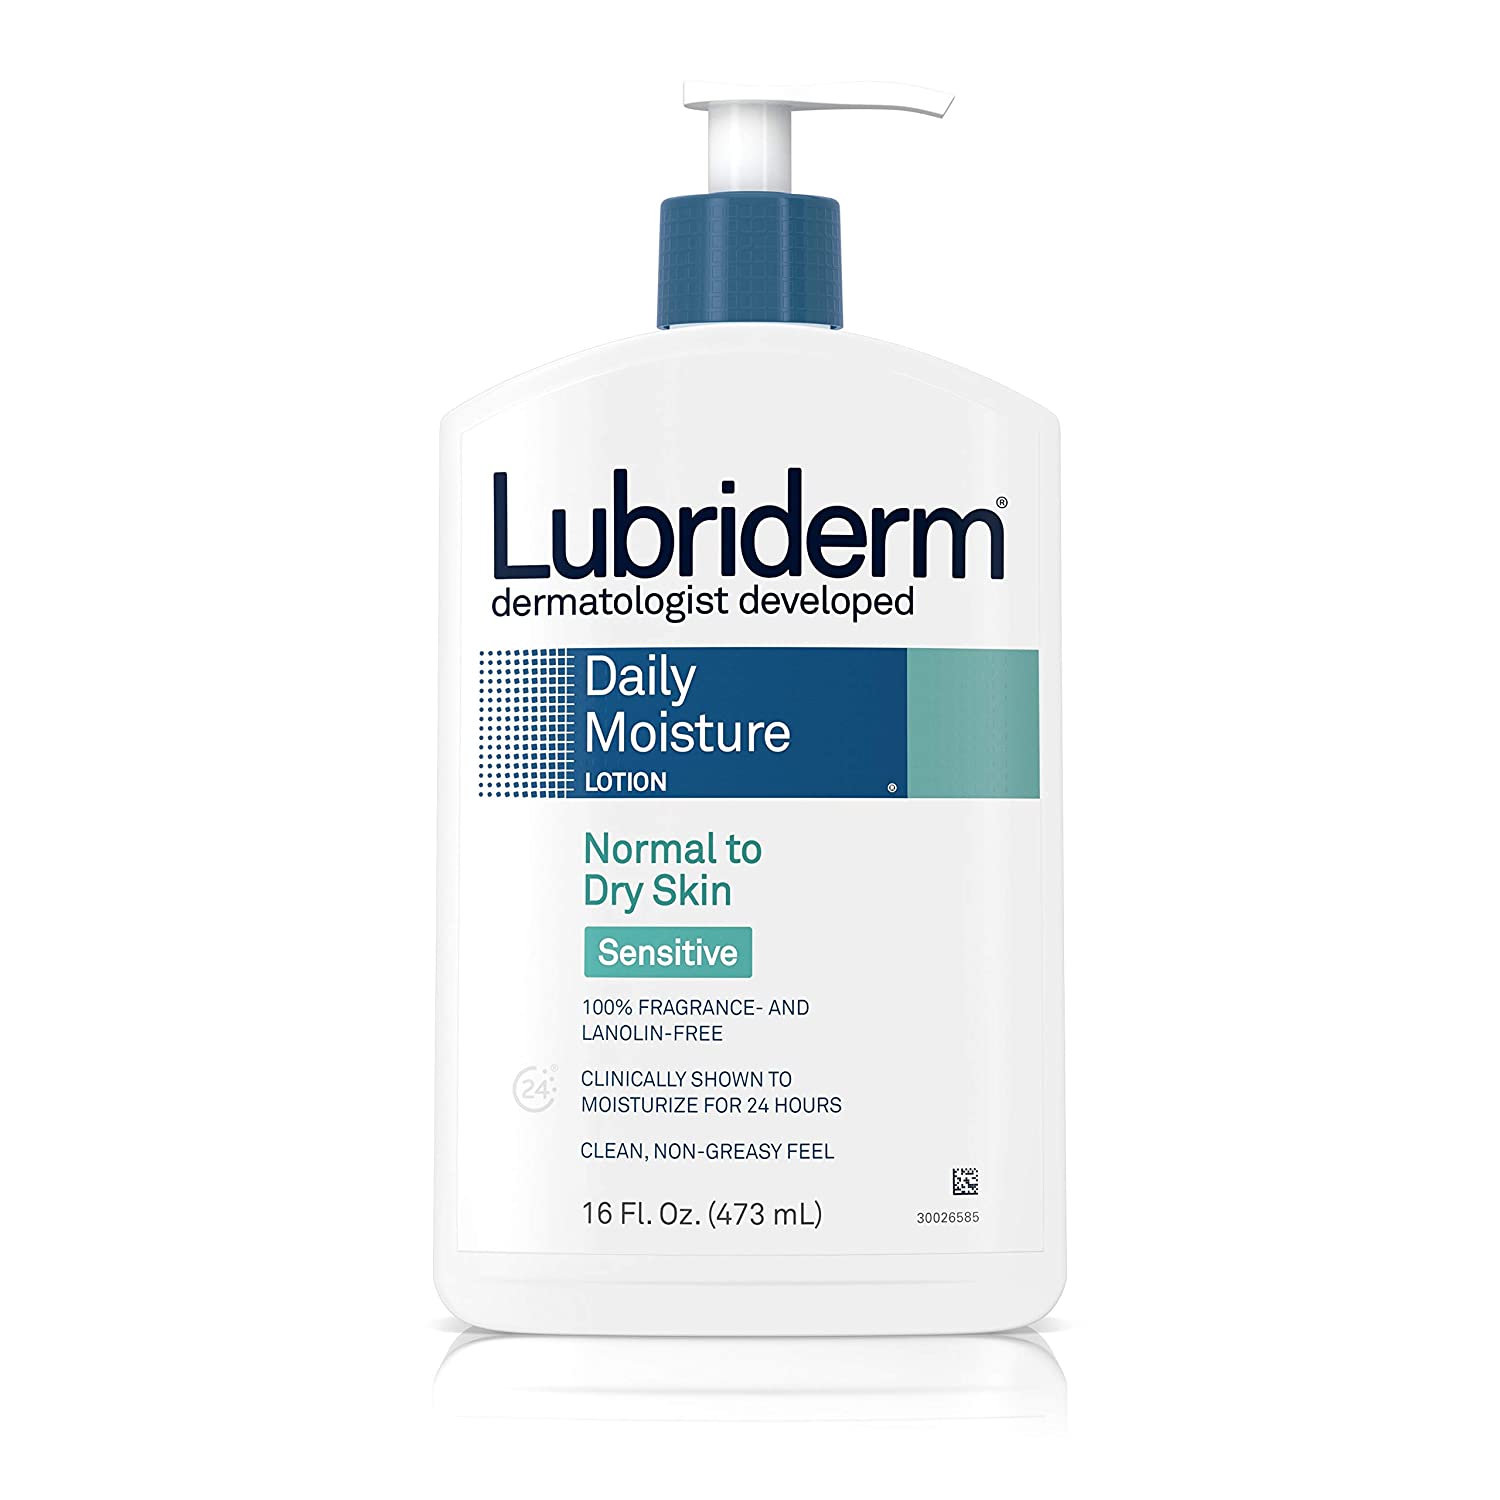 Lubriderm Daily Moisture Body Lotion for Sensitive Dry Skin Enriched with Vitamin B5 Dye and Lanolin Free